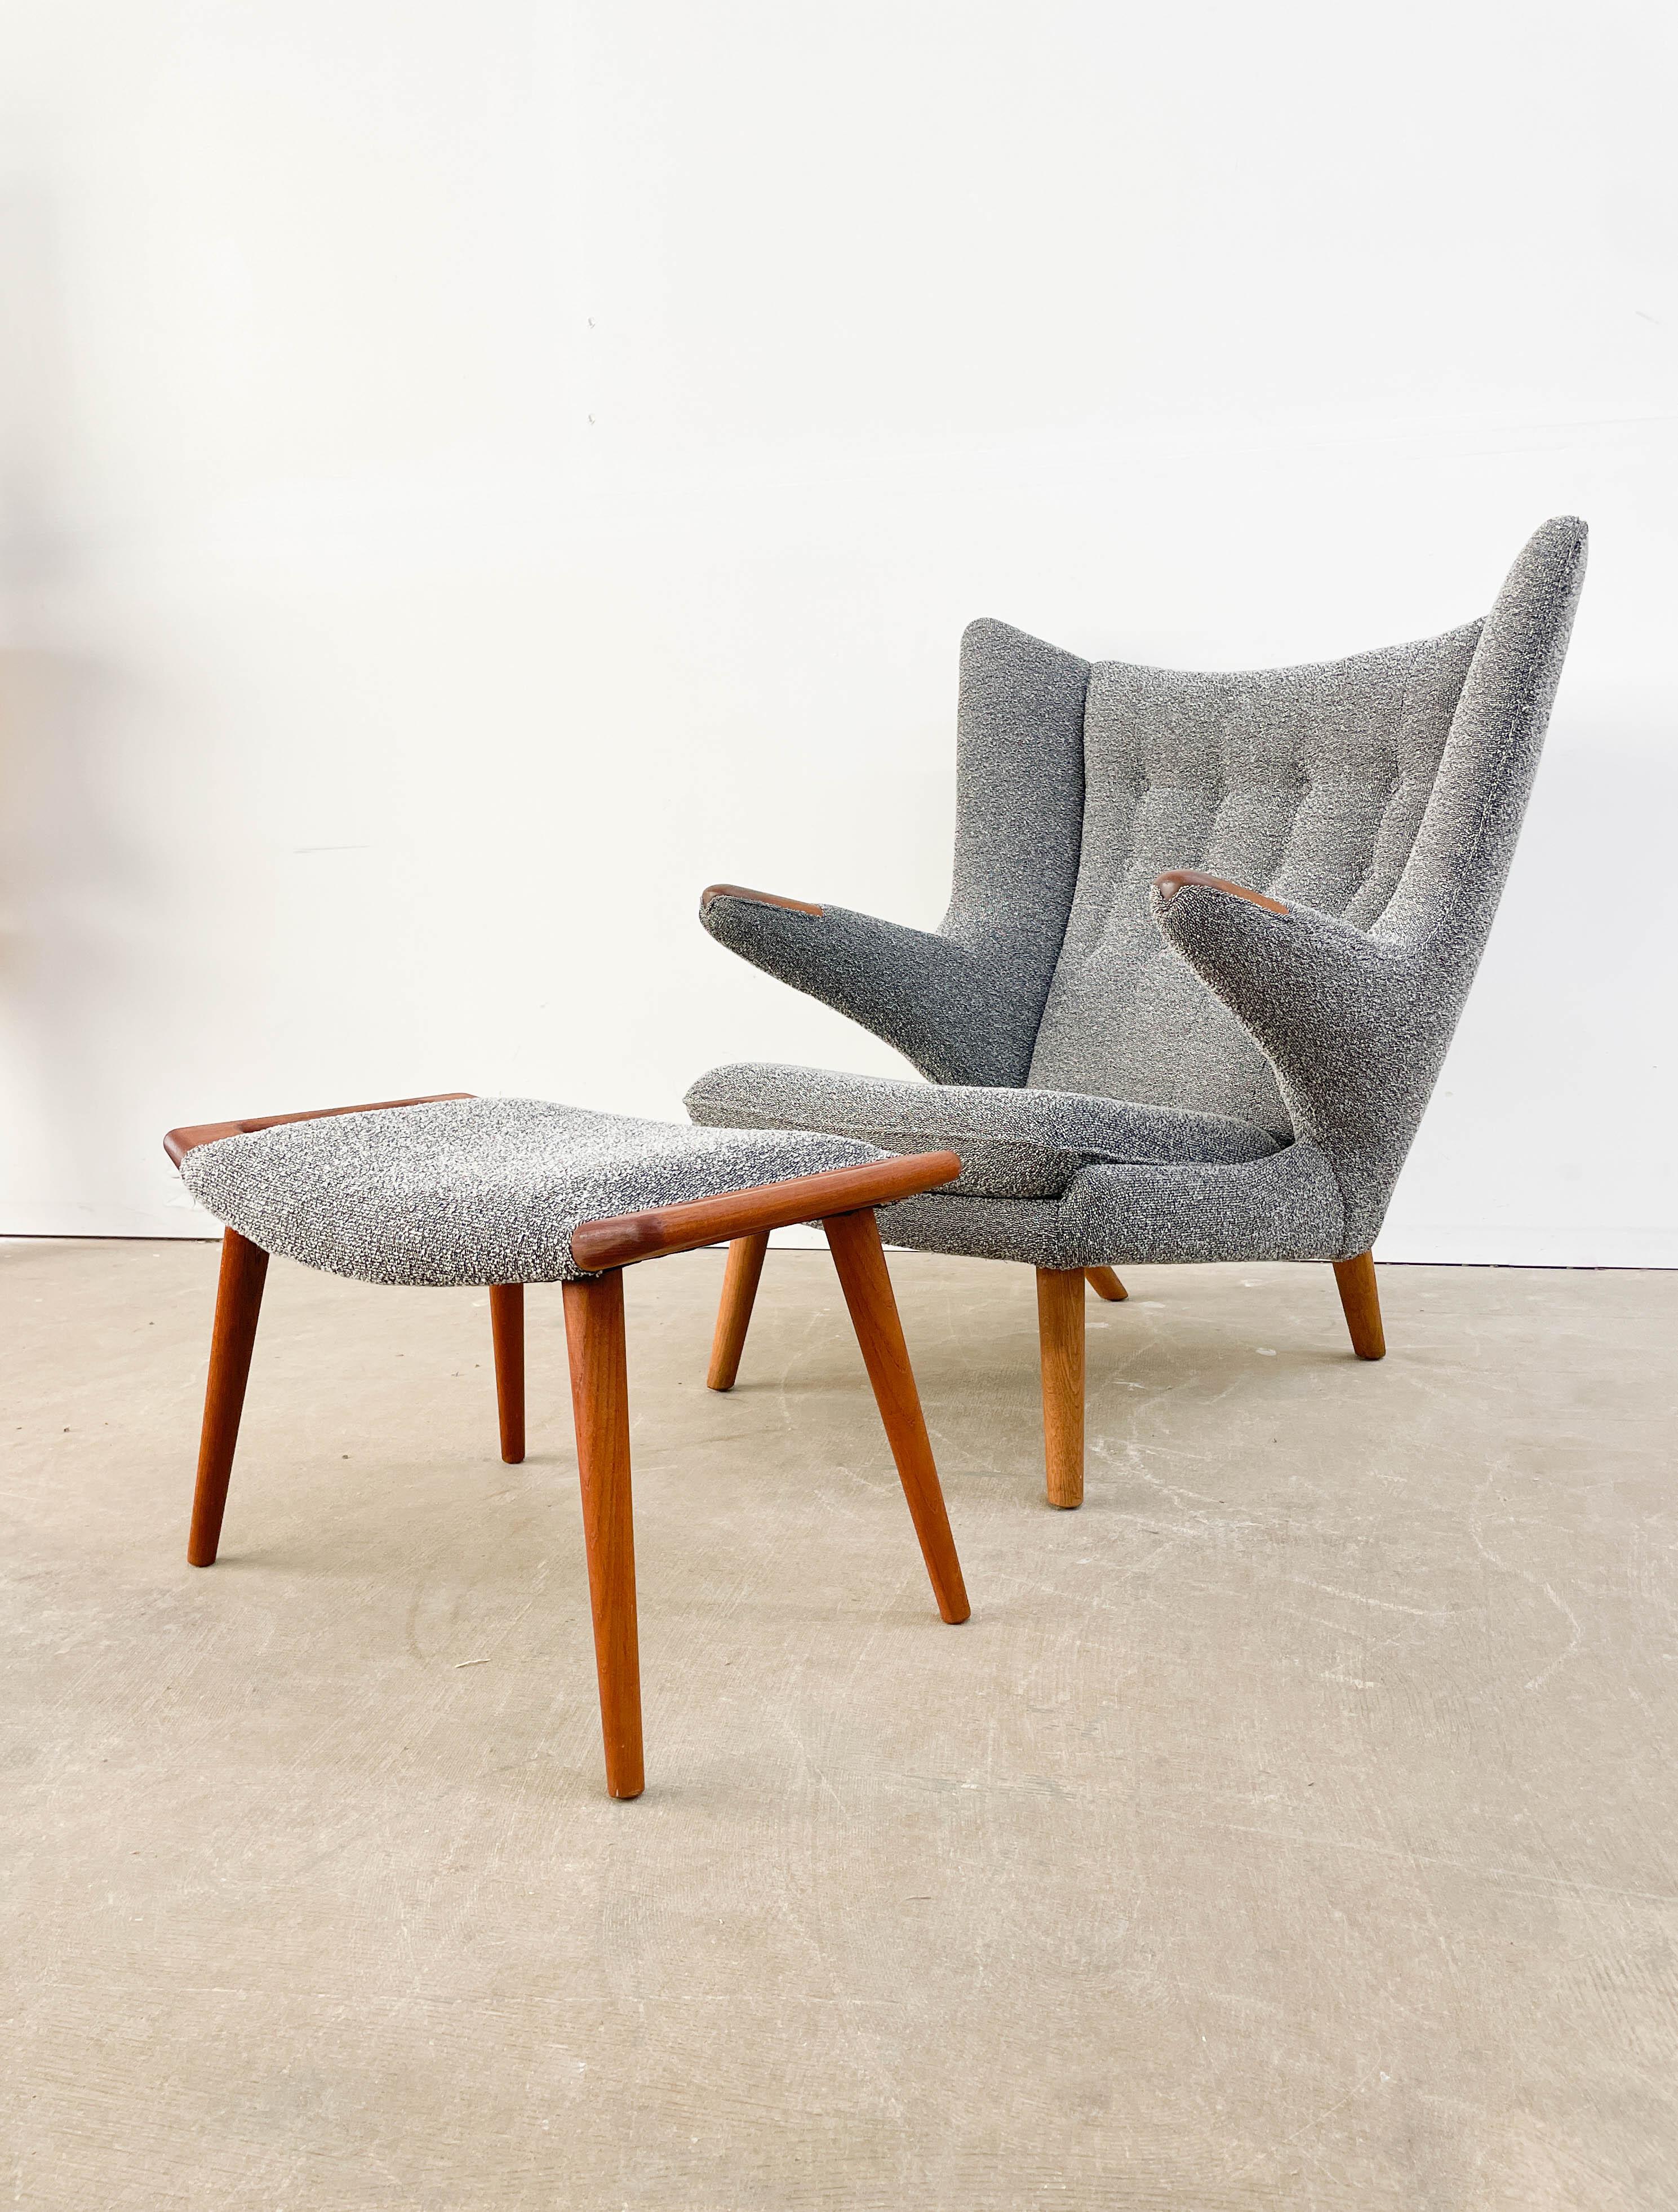 This is a superb example of Hans Wegner's iconic AP19 'Papa Bear' chair. The iconic was designed in 1951 and prized for its superb comfort and striking form. This example was reupholstered in the 1990s in an excellent Kvadrat speckled gray wool for